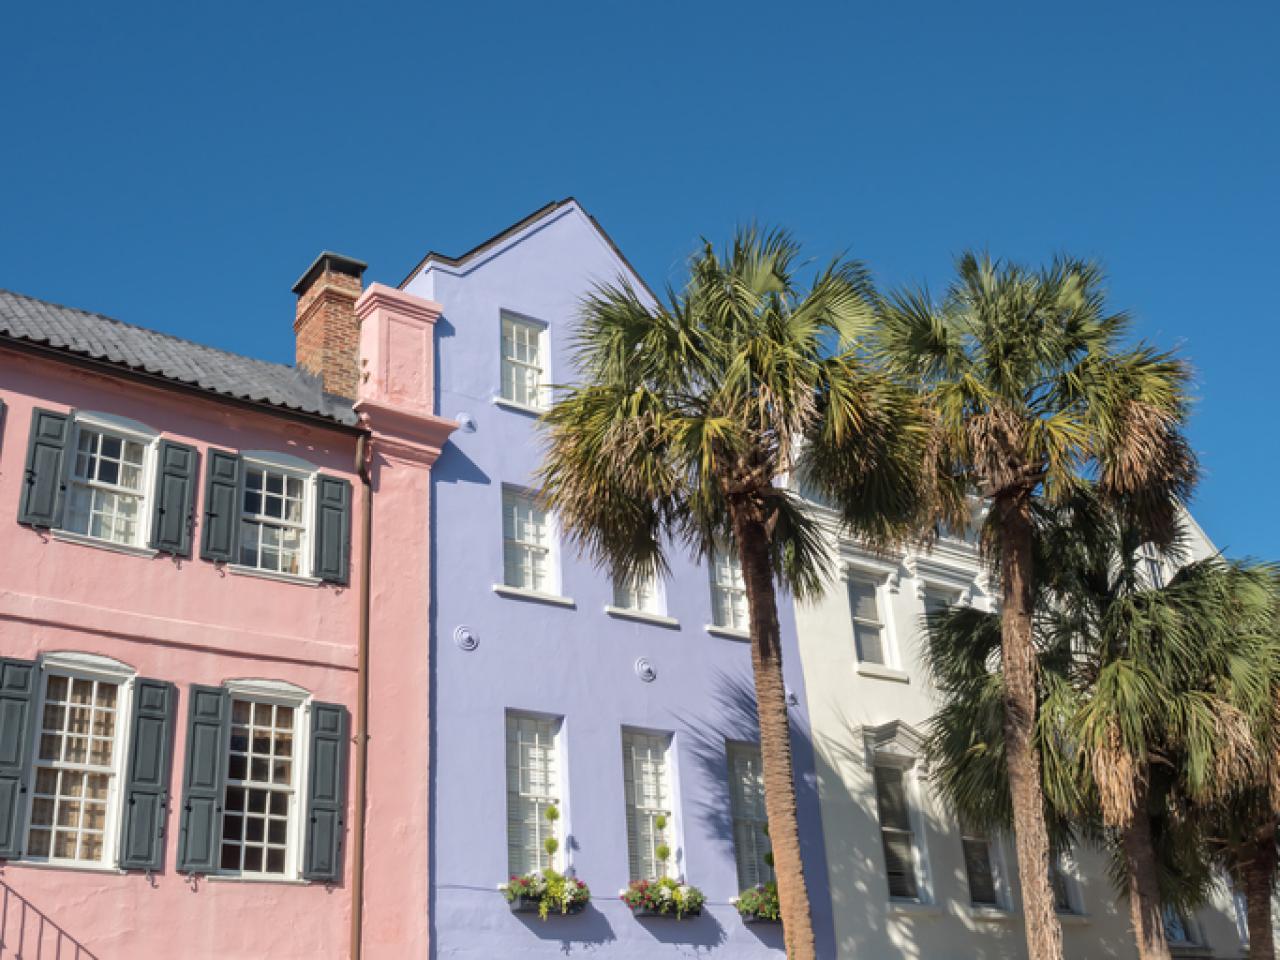  Channel Charleston's Vibrant Rainbow Row With These Exterior Paint Colors's Decorating 